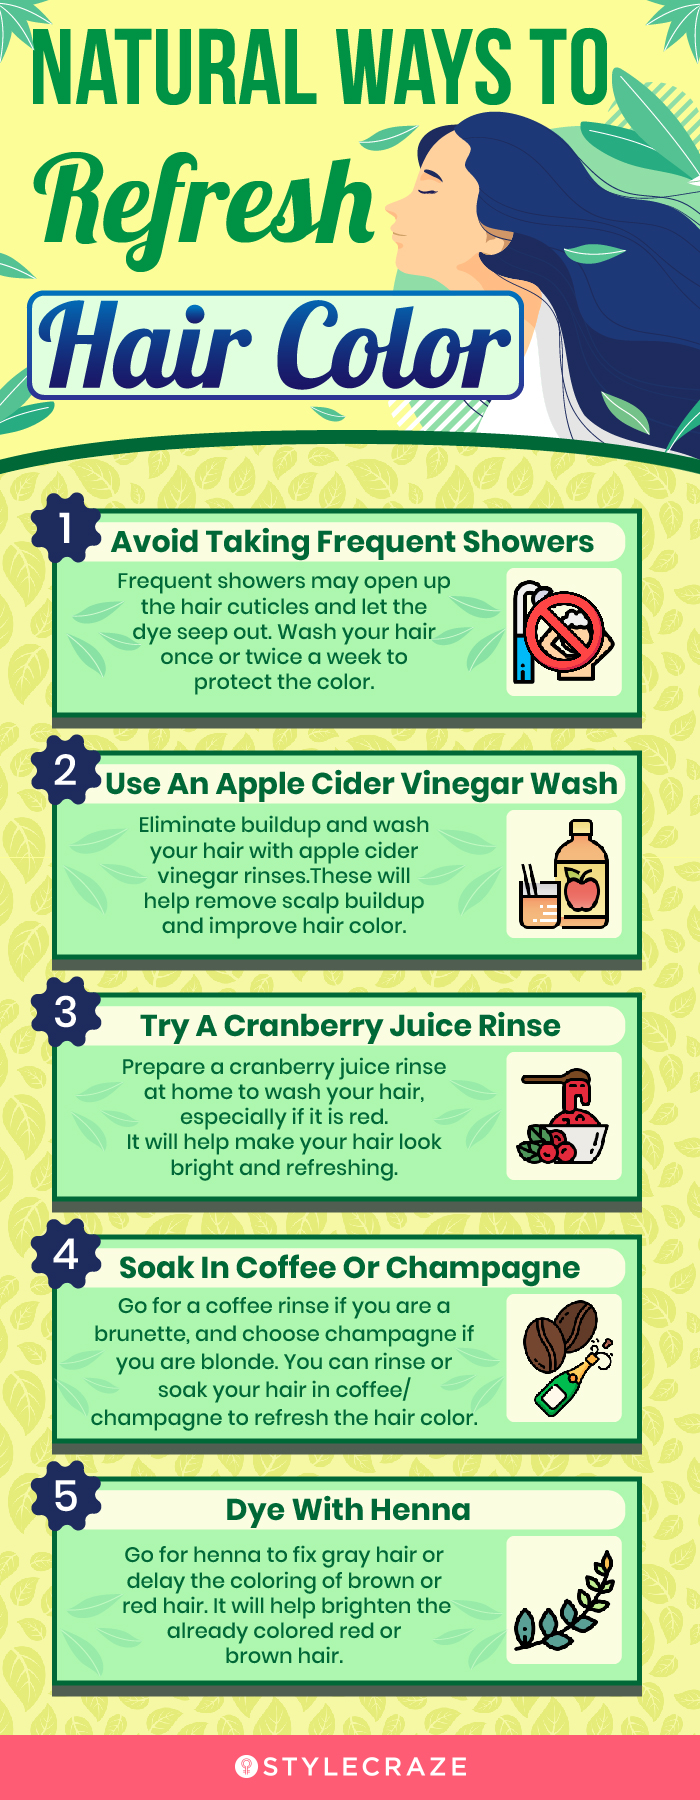 natural ways to refresh hair color (infographic)